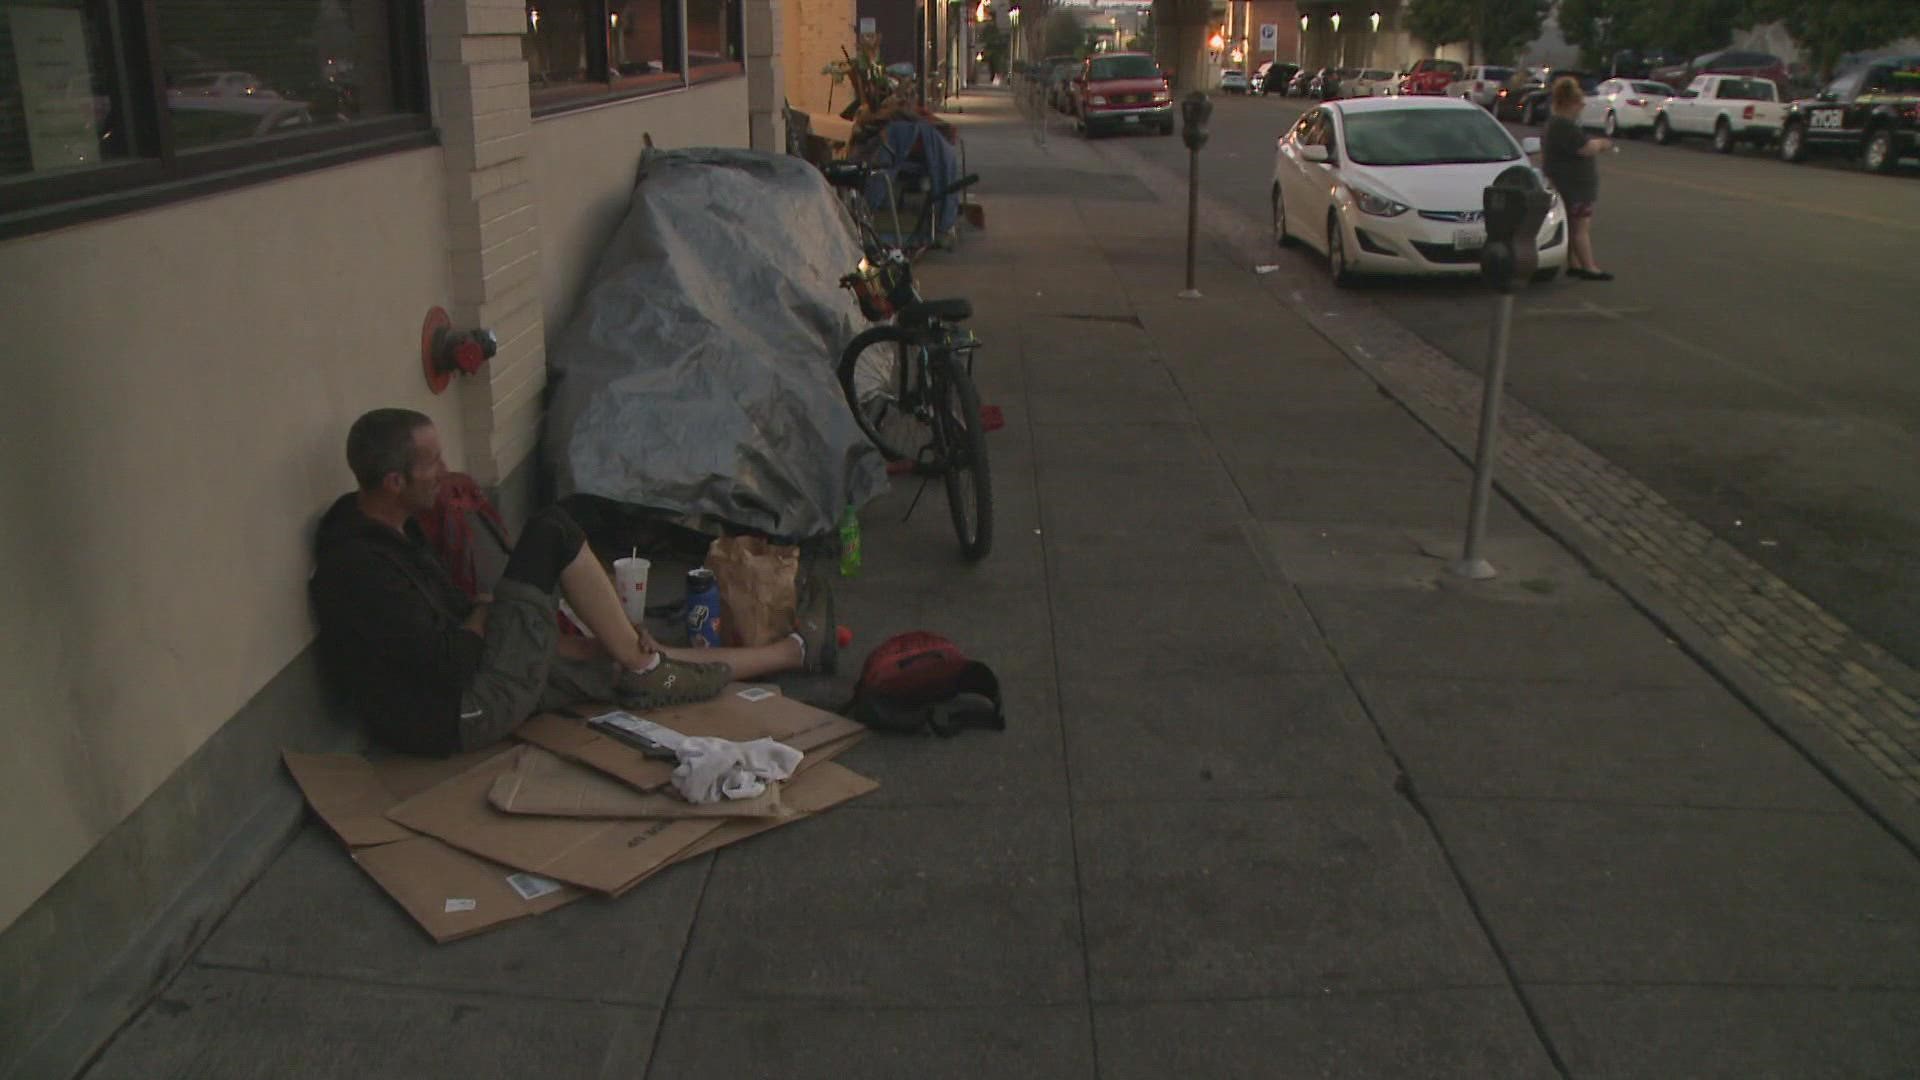 Under Spokane's current ordinance, camping is not allowed on public property and a person cannot sit or lie on the sidewalk between 6 a.m. and midnight.